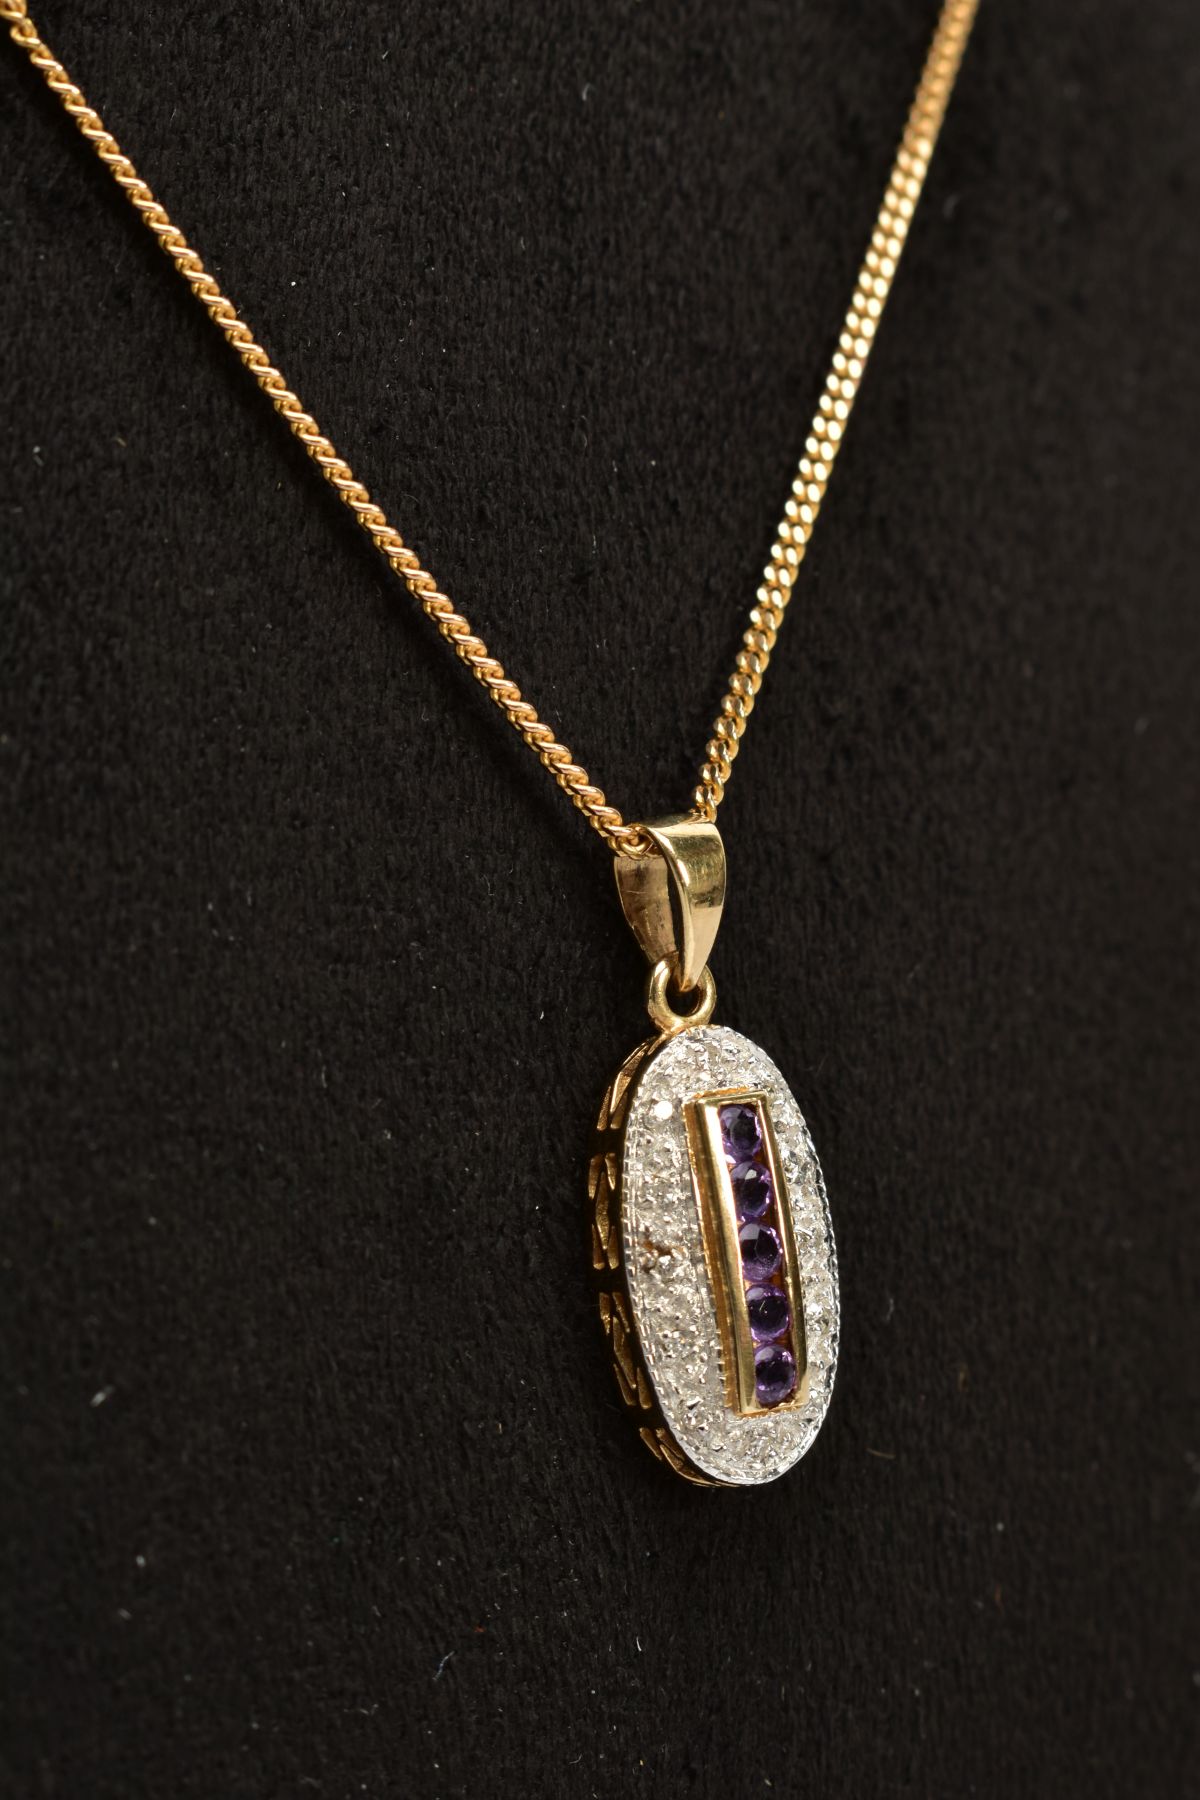 A 9CT GOLD AMETHYST AND DIAMOND PENDANT NECKLACE, the oval pendant designed with a central row of - Image 2 of 3